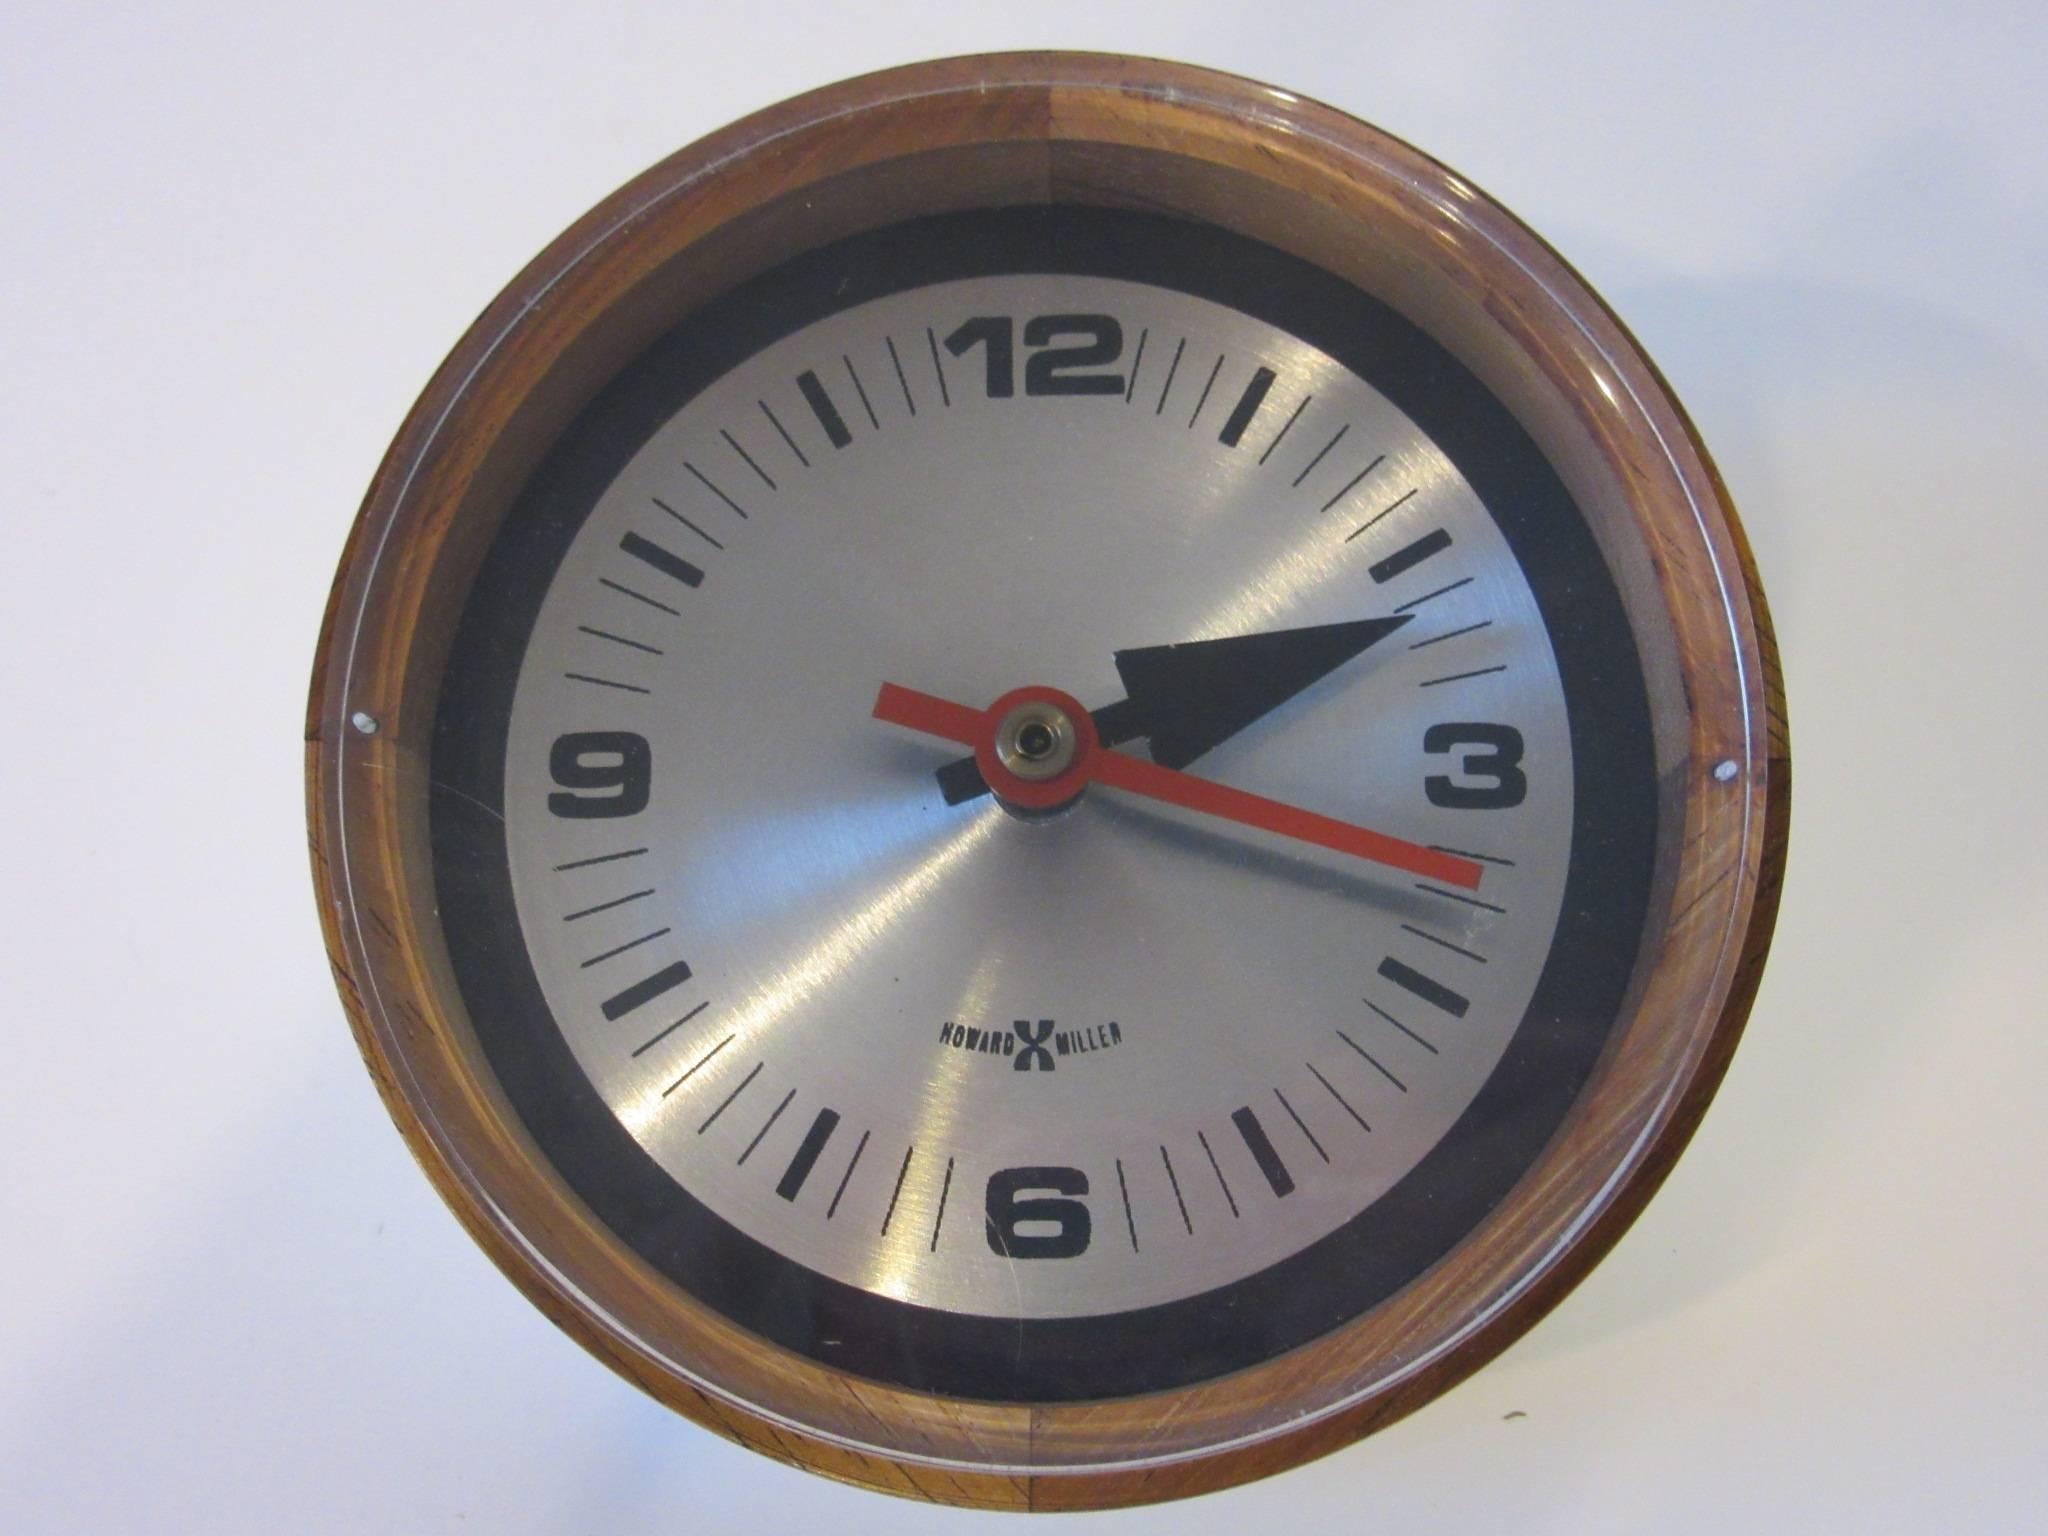 A rosewood and brushed aluminium table clock with angled base for viewing, a Lucite face plate protects the hands manufactured by the Howard Miller Clock Company model # 663 with the original working battery operated motor and labels.